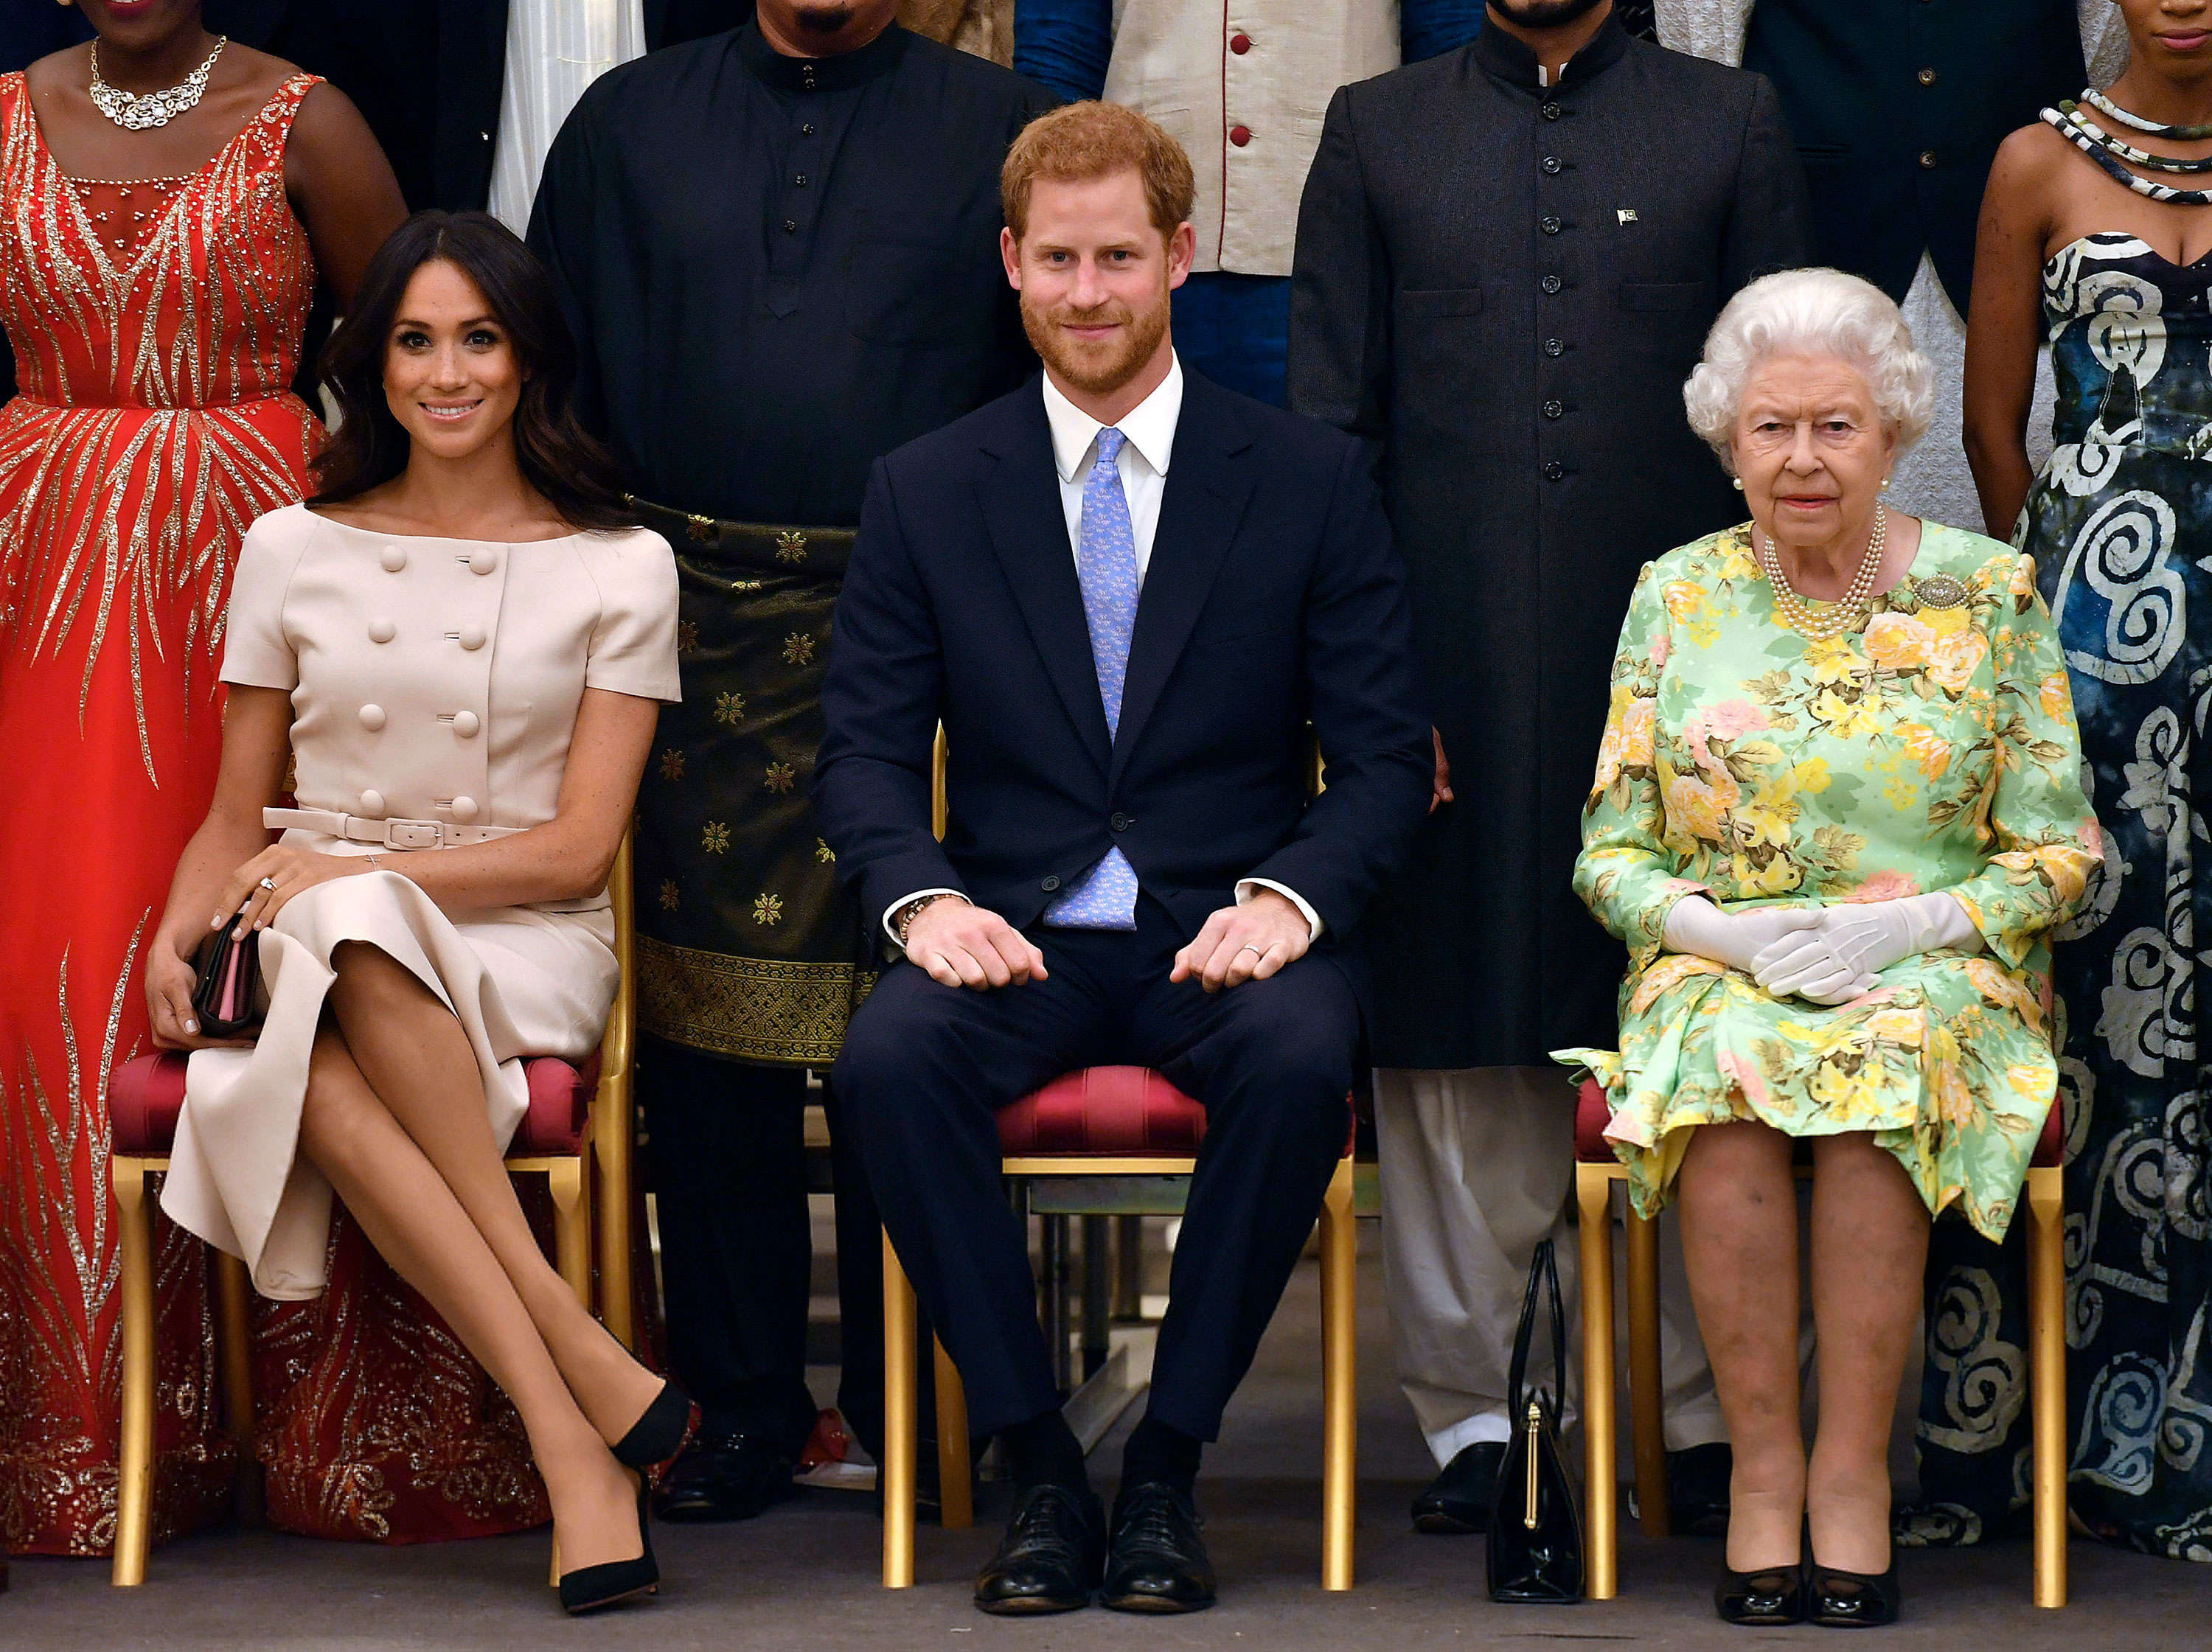 Britain's Queen Elizabeth, Prince Harry and Meghan, Duchess of Sussex pose for a photo in 2018.